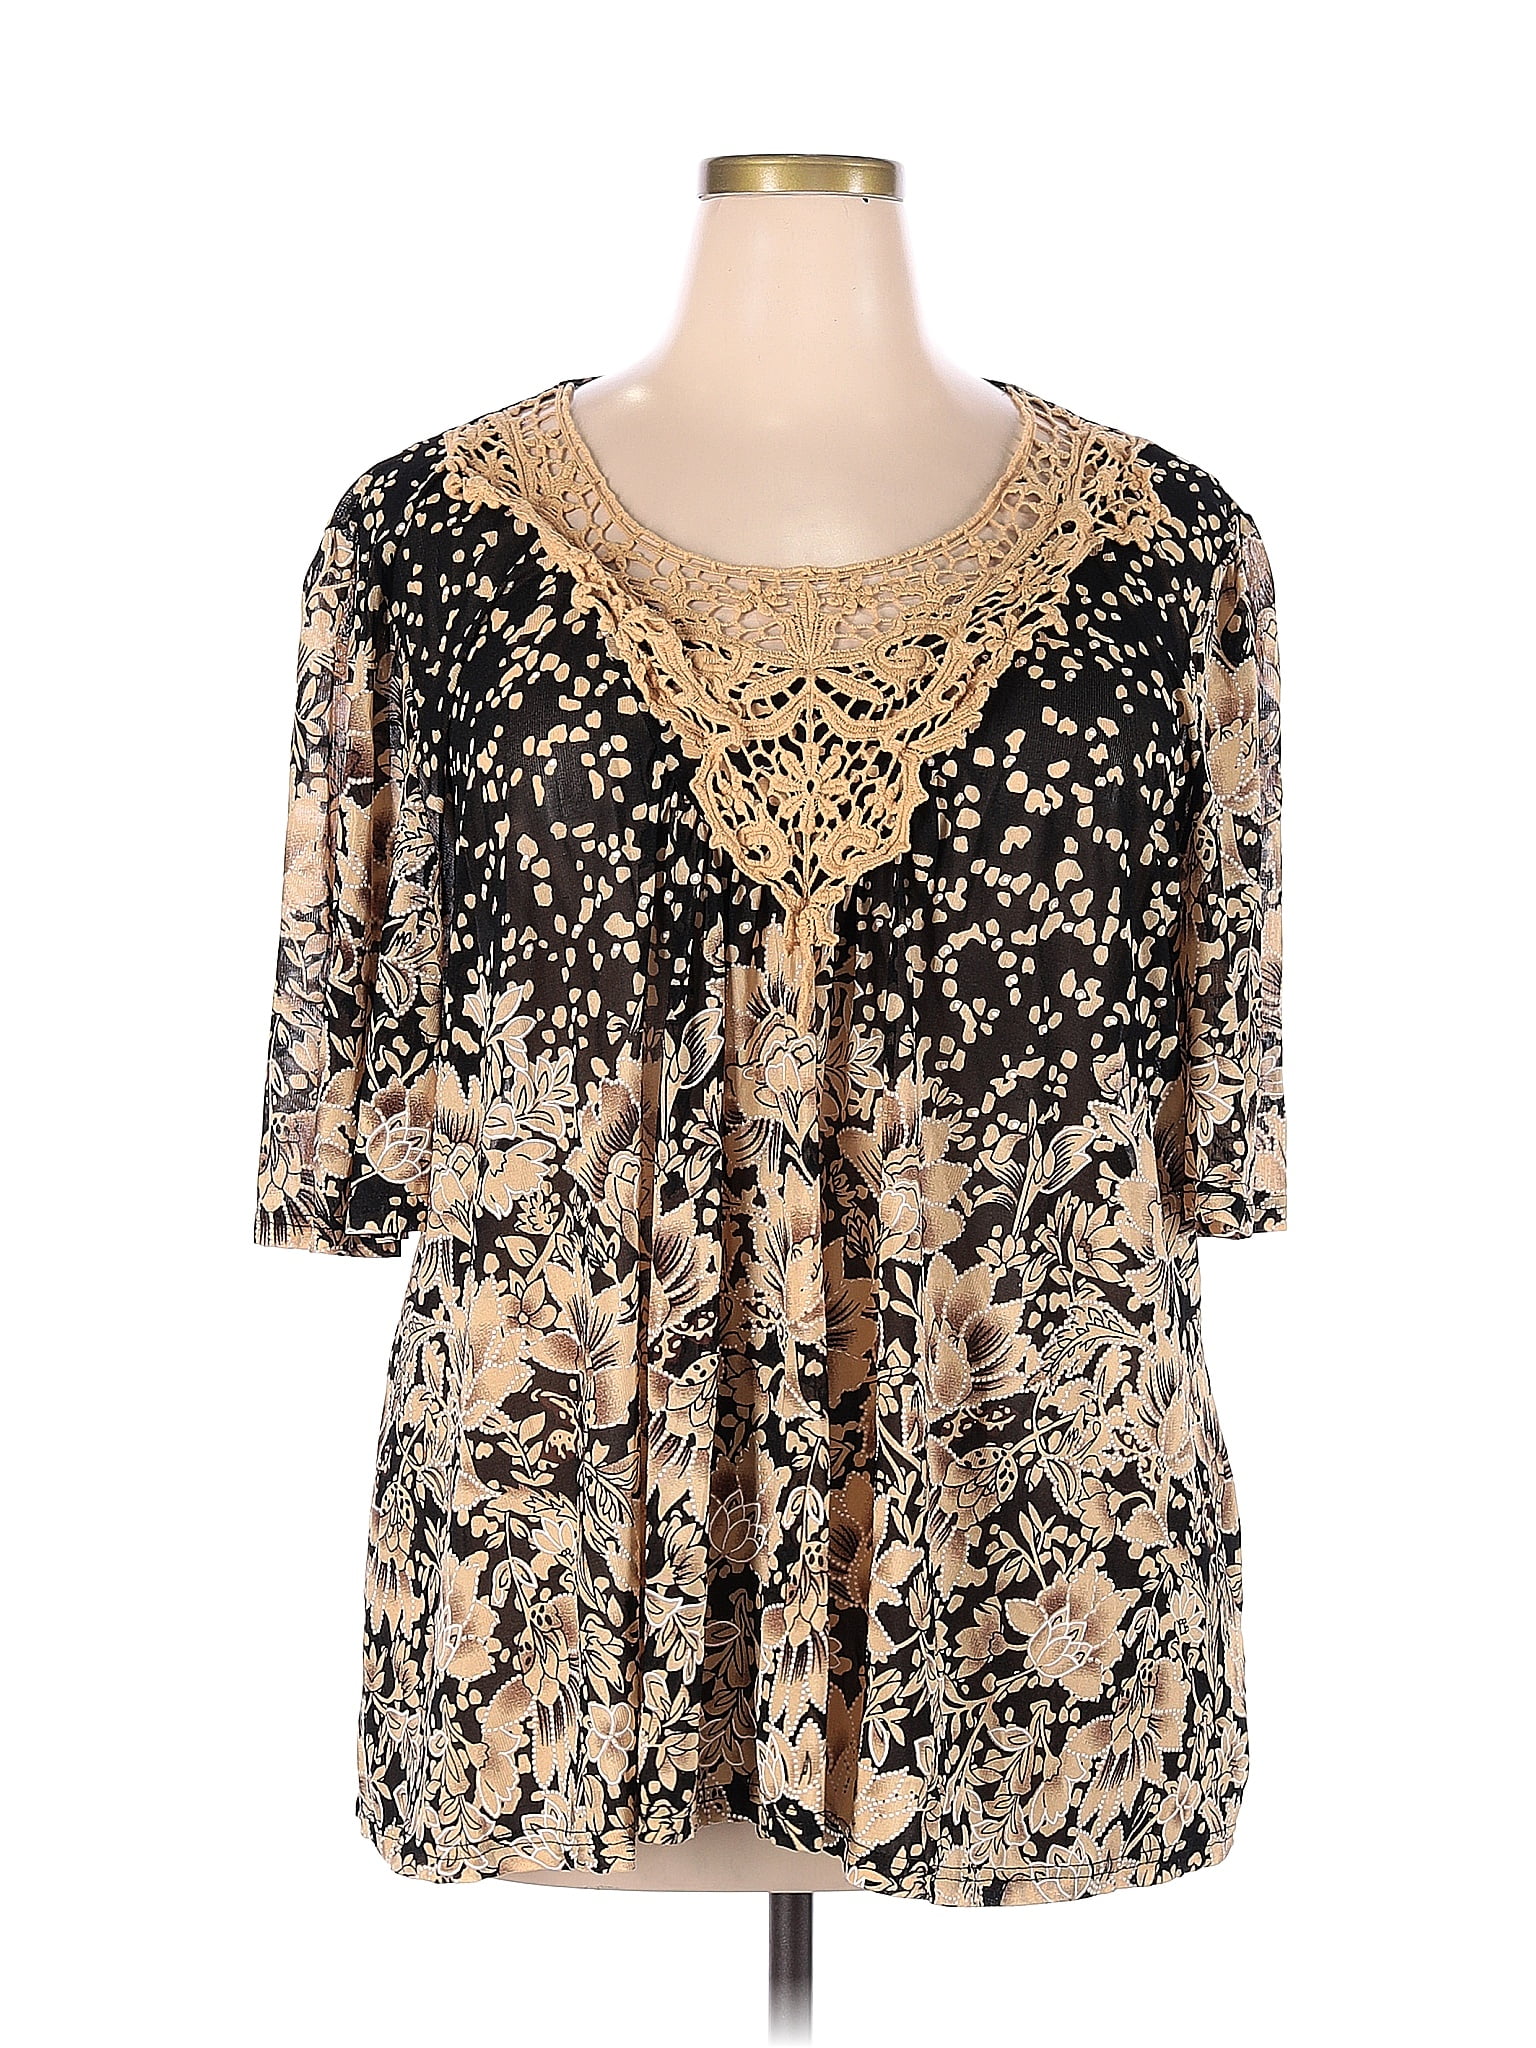 Suzanne Betro Floral Tan Gold Short Sleeve Top Size 4X (Plus) - 72% off ...